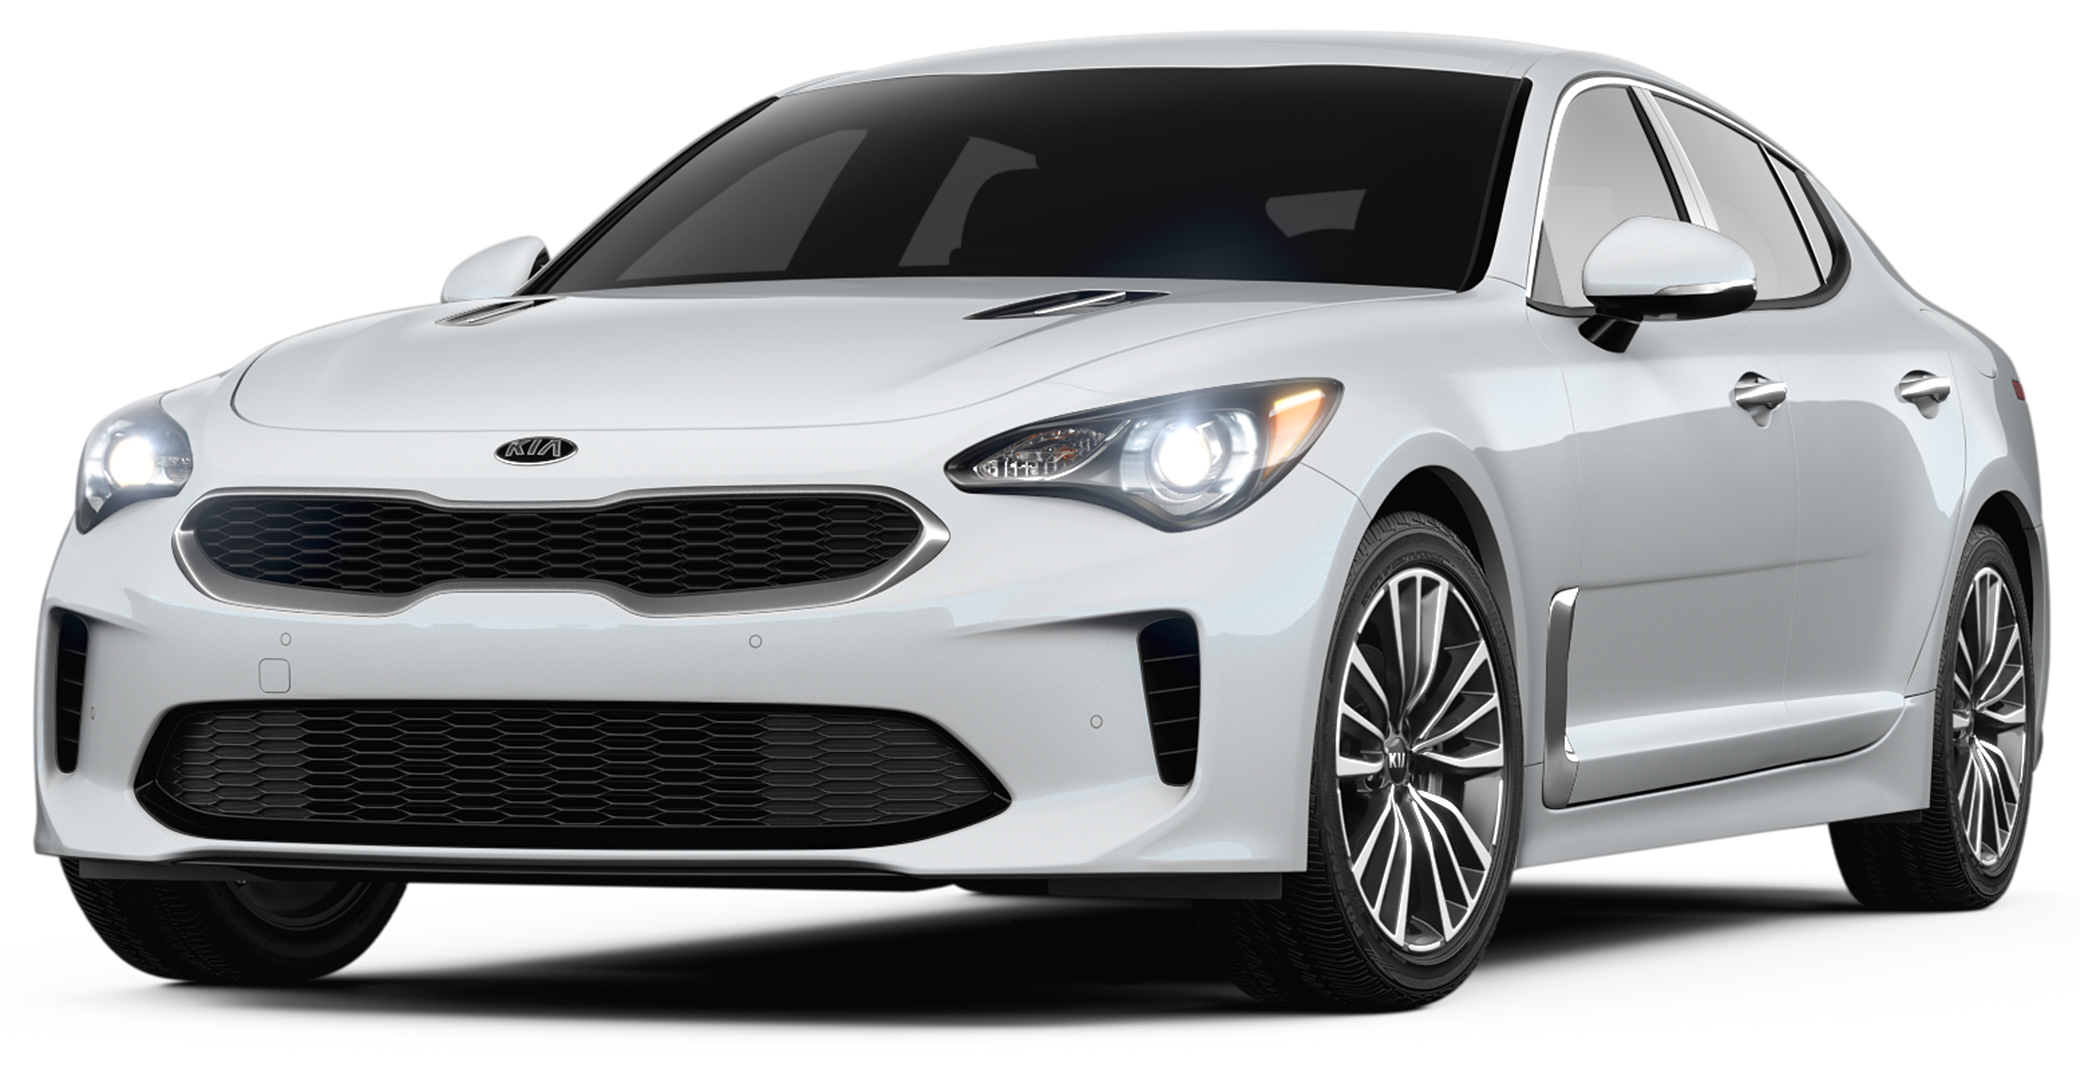 2019-kia-stinger-incentives-specials-offers-in-wesley-chapel-fl